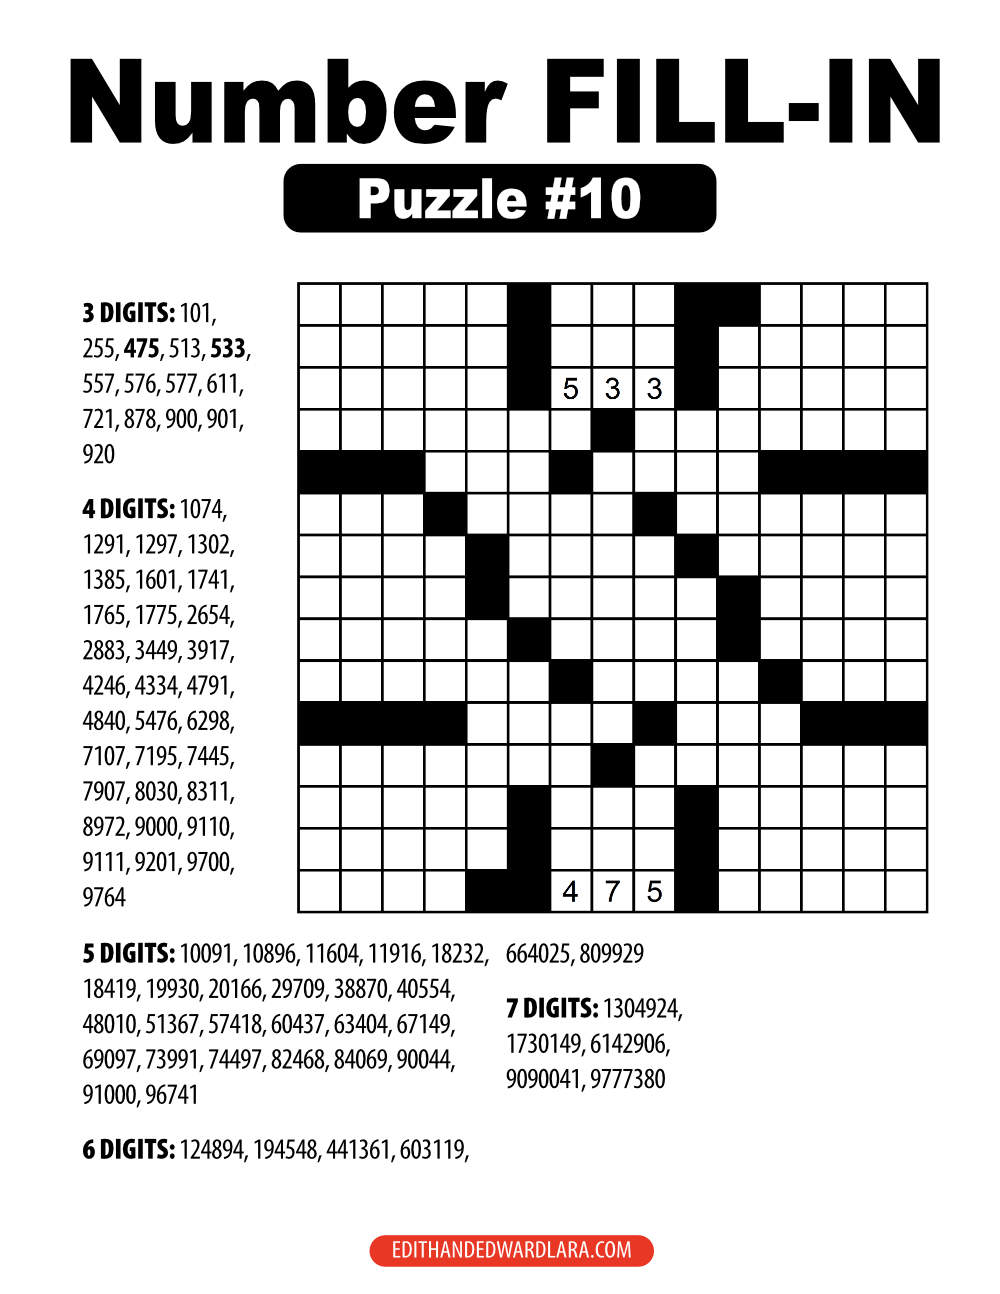 Number FILL-IN Puzzle Number 10